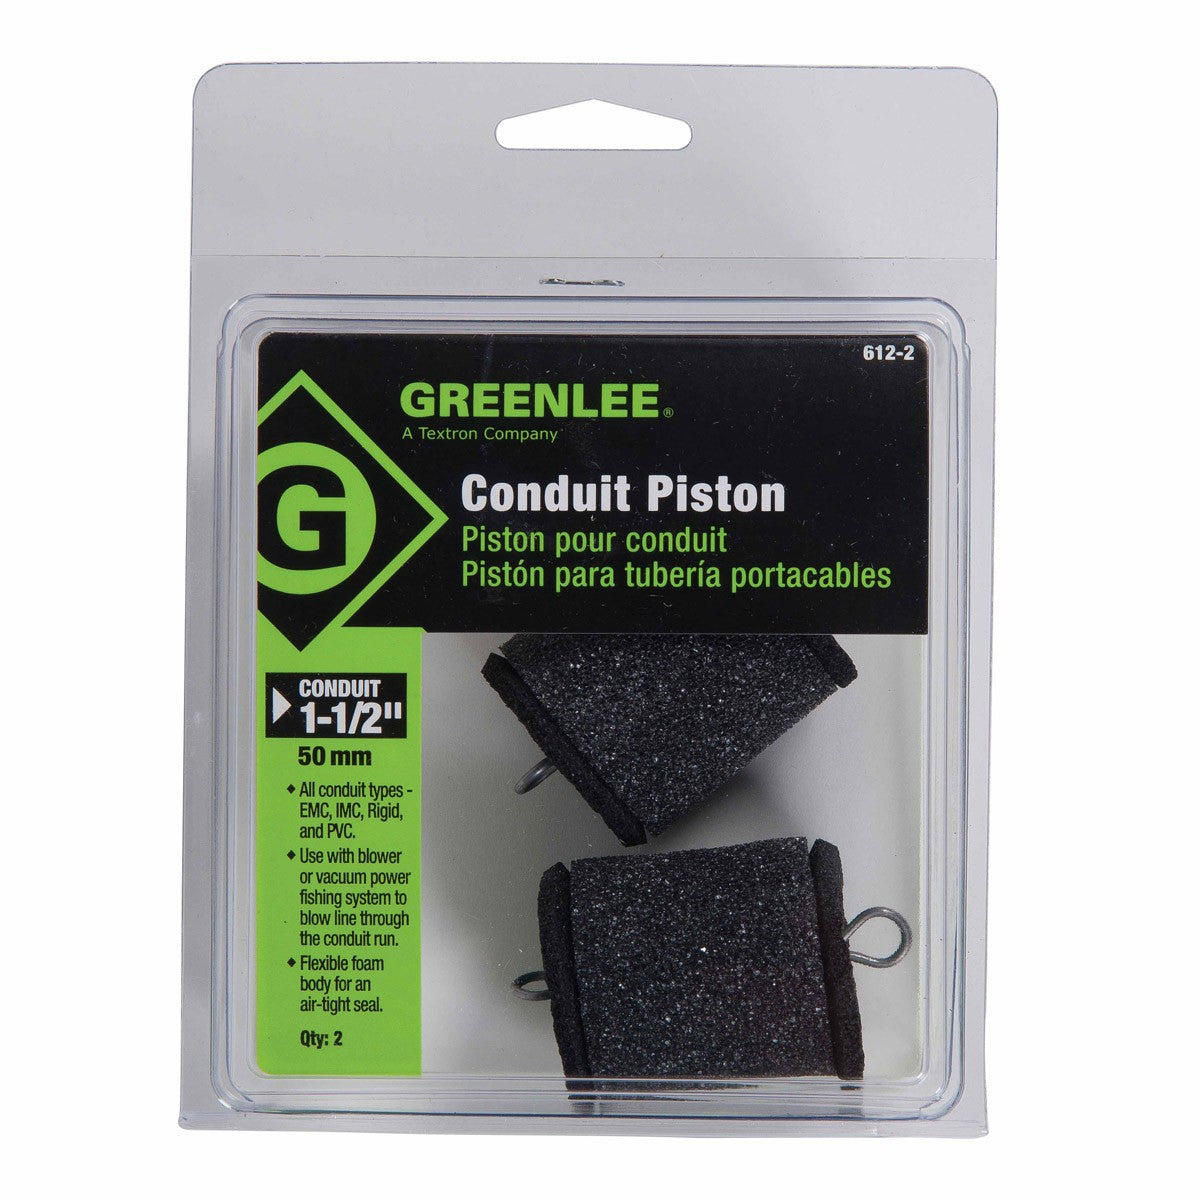 Greenlee 612-2 Piston for 1-1/2" Conduit - All Types (2 pack)